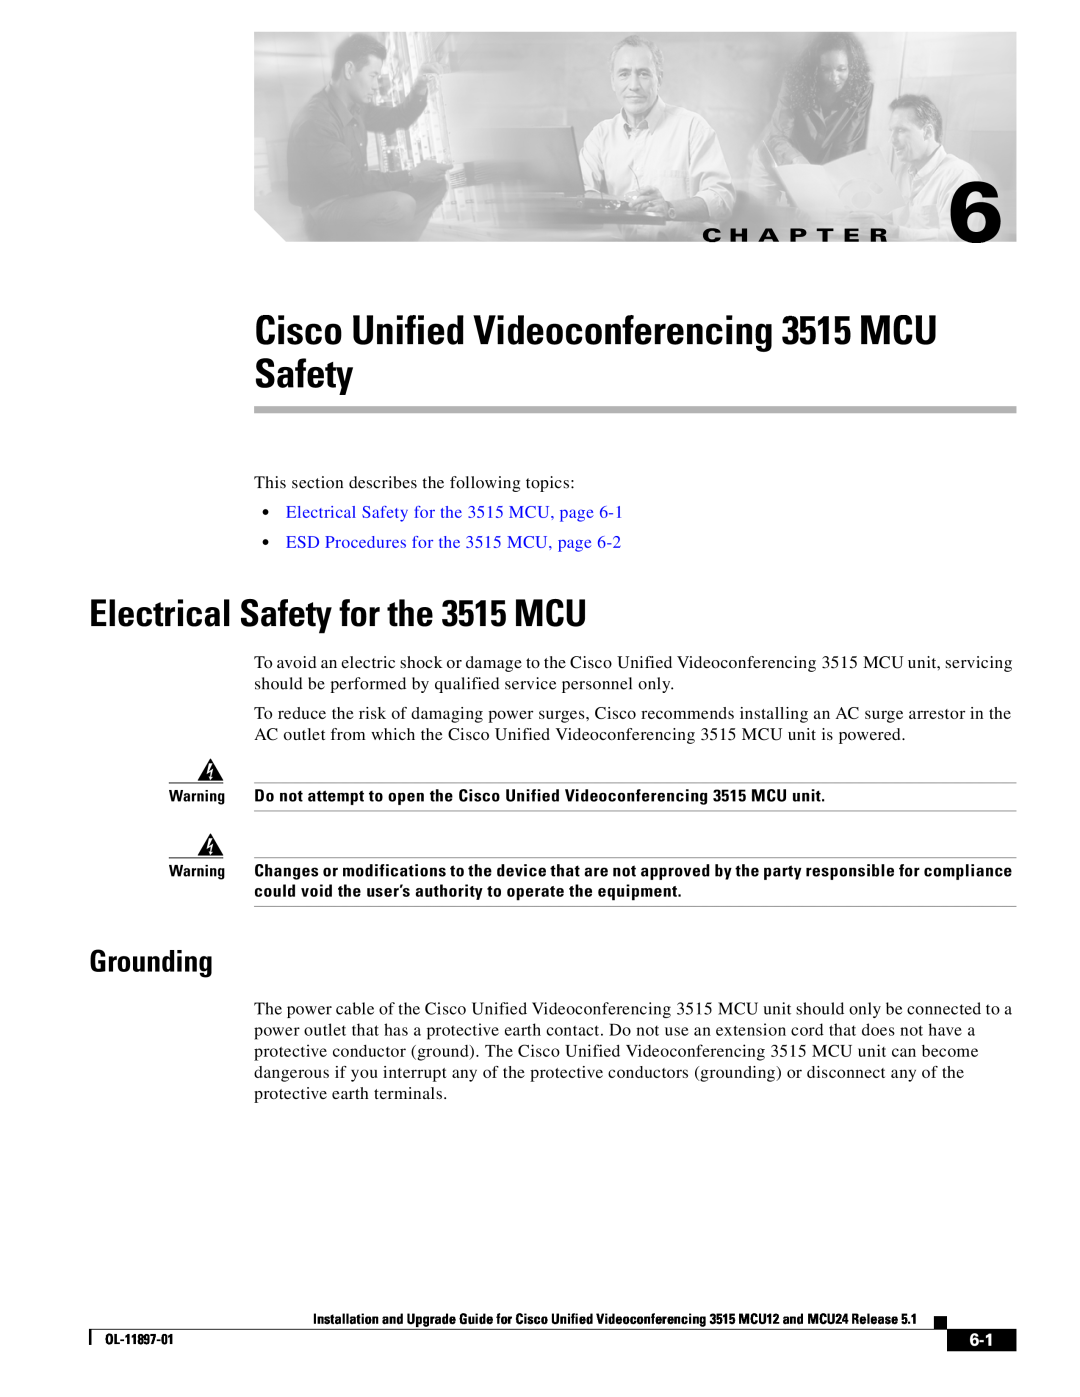 Cisco Systems MCU24 manual Cisco Unified Videoconferencing 3515 MCU Safety, Electrical Safety for the 3515 MCU, Grounding 